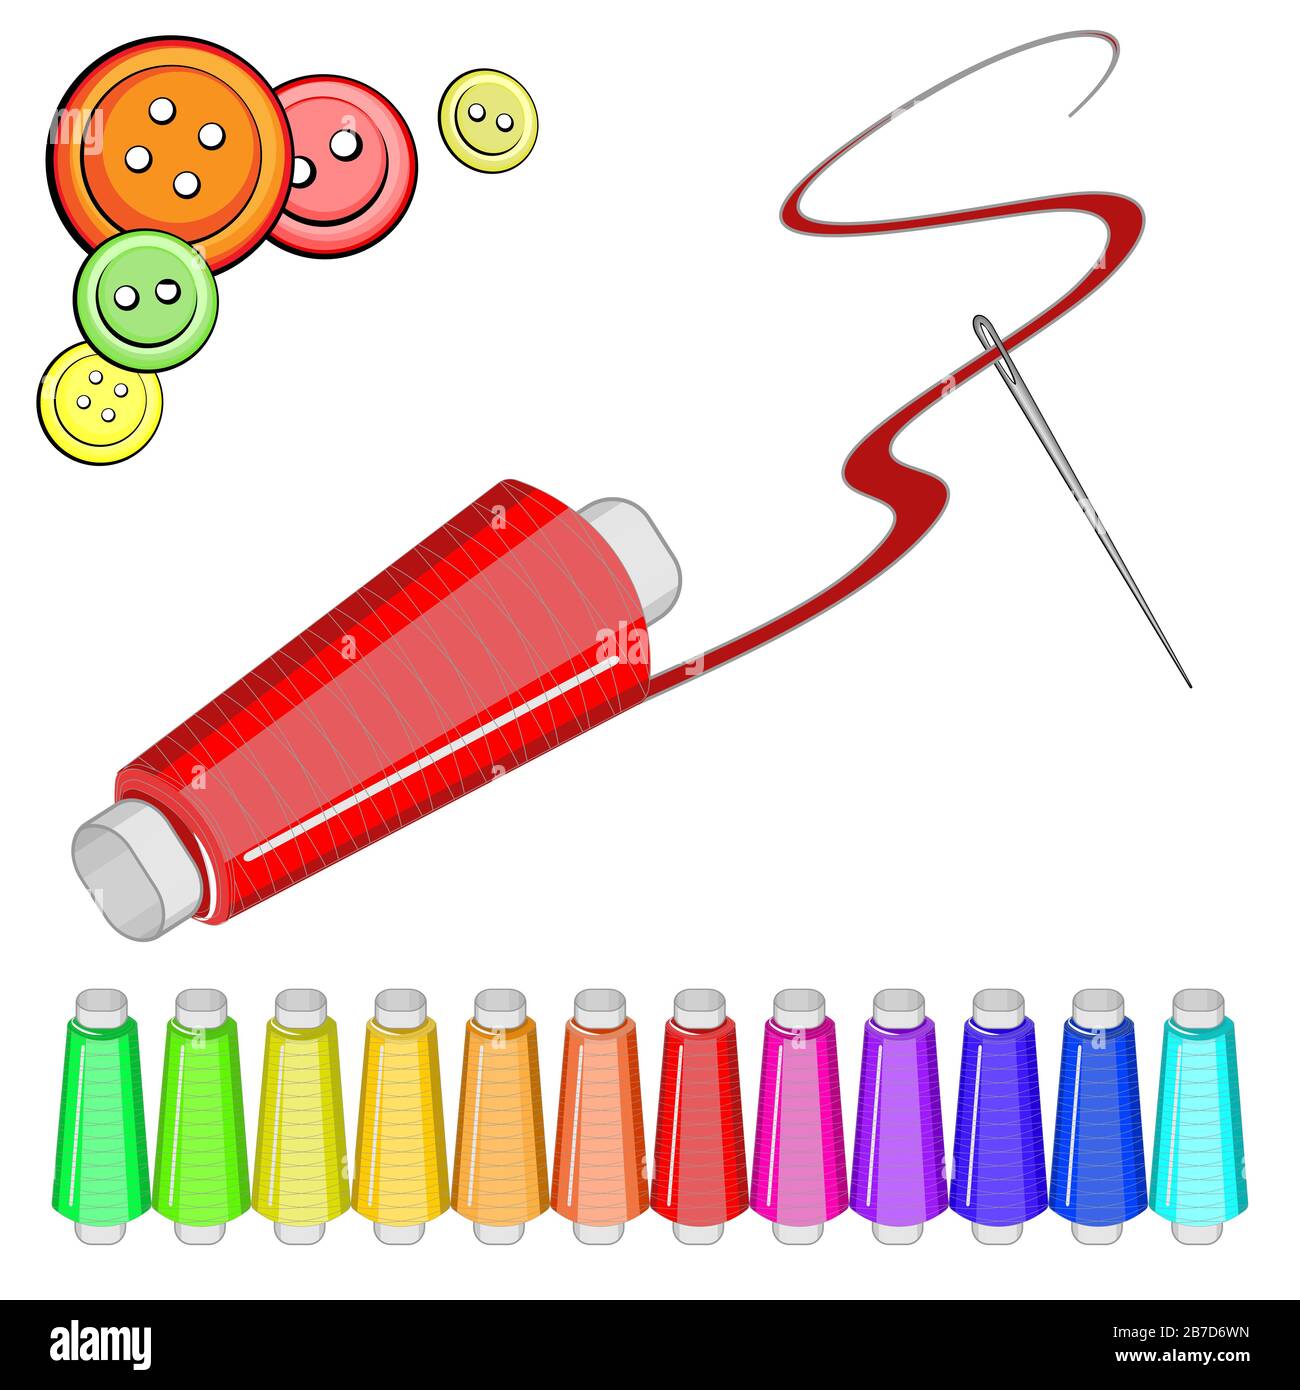 Vector illustration for a needlework project - a set of colored threads for sewing, a large needle and thread and a few buttons. Isolate on a white square background. Stock Vector